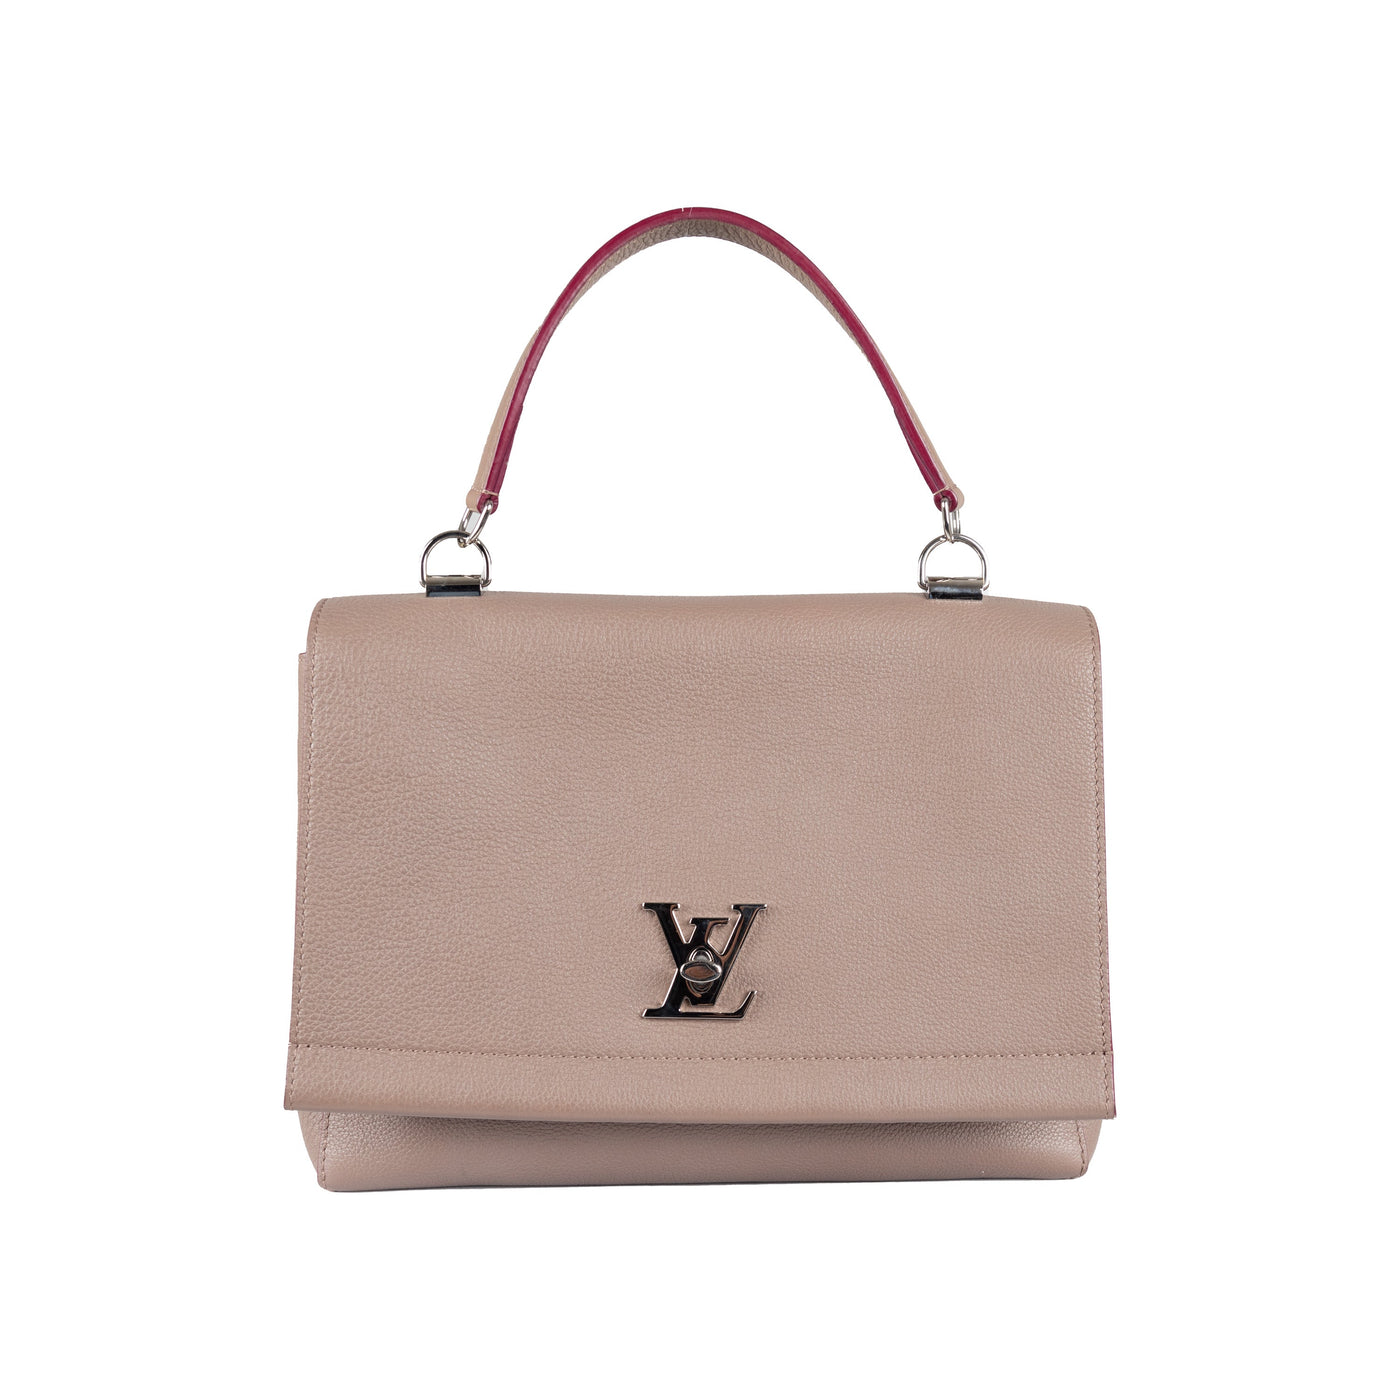 Louis Vuitton Cream and Burgundy Grained Calf Leather Lockme Day Bag